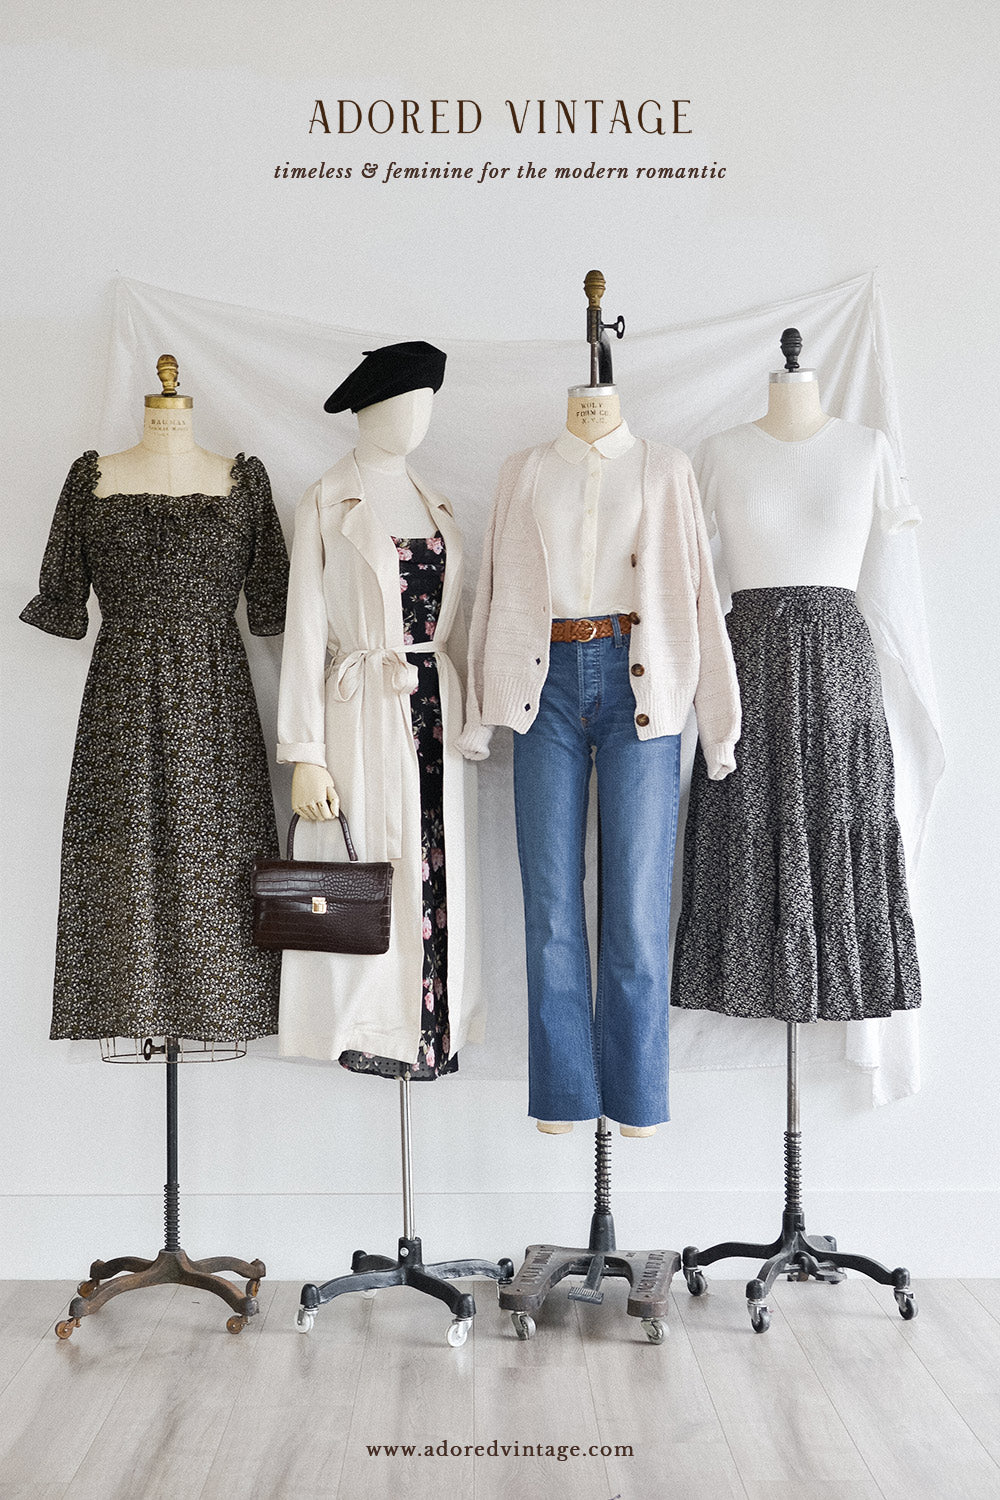 Vintage French Girl Inspired Outfits - Adored Vintage Women's Clothing Store